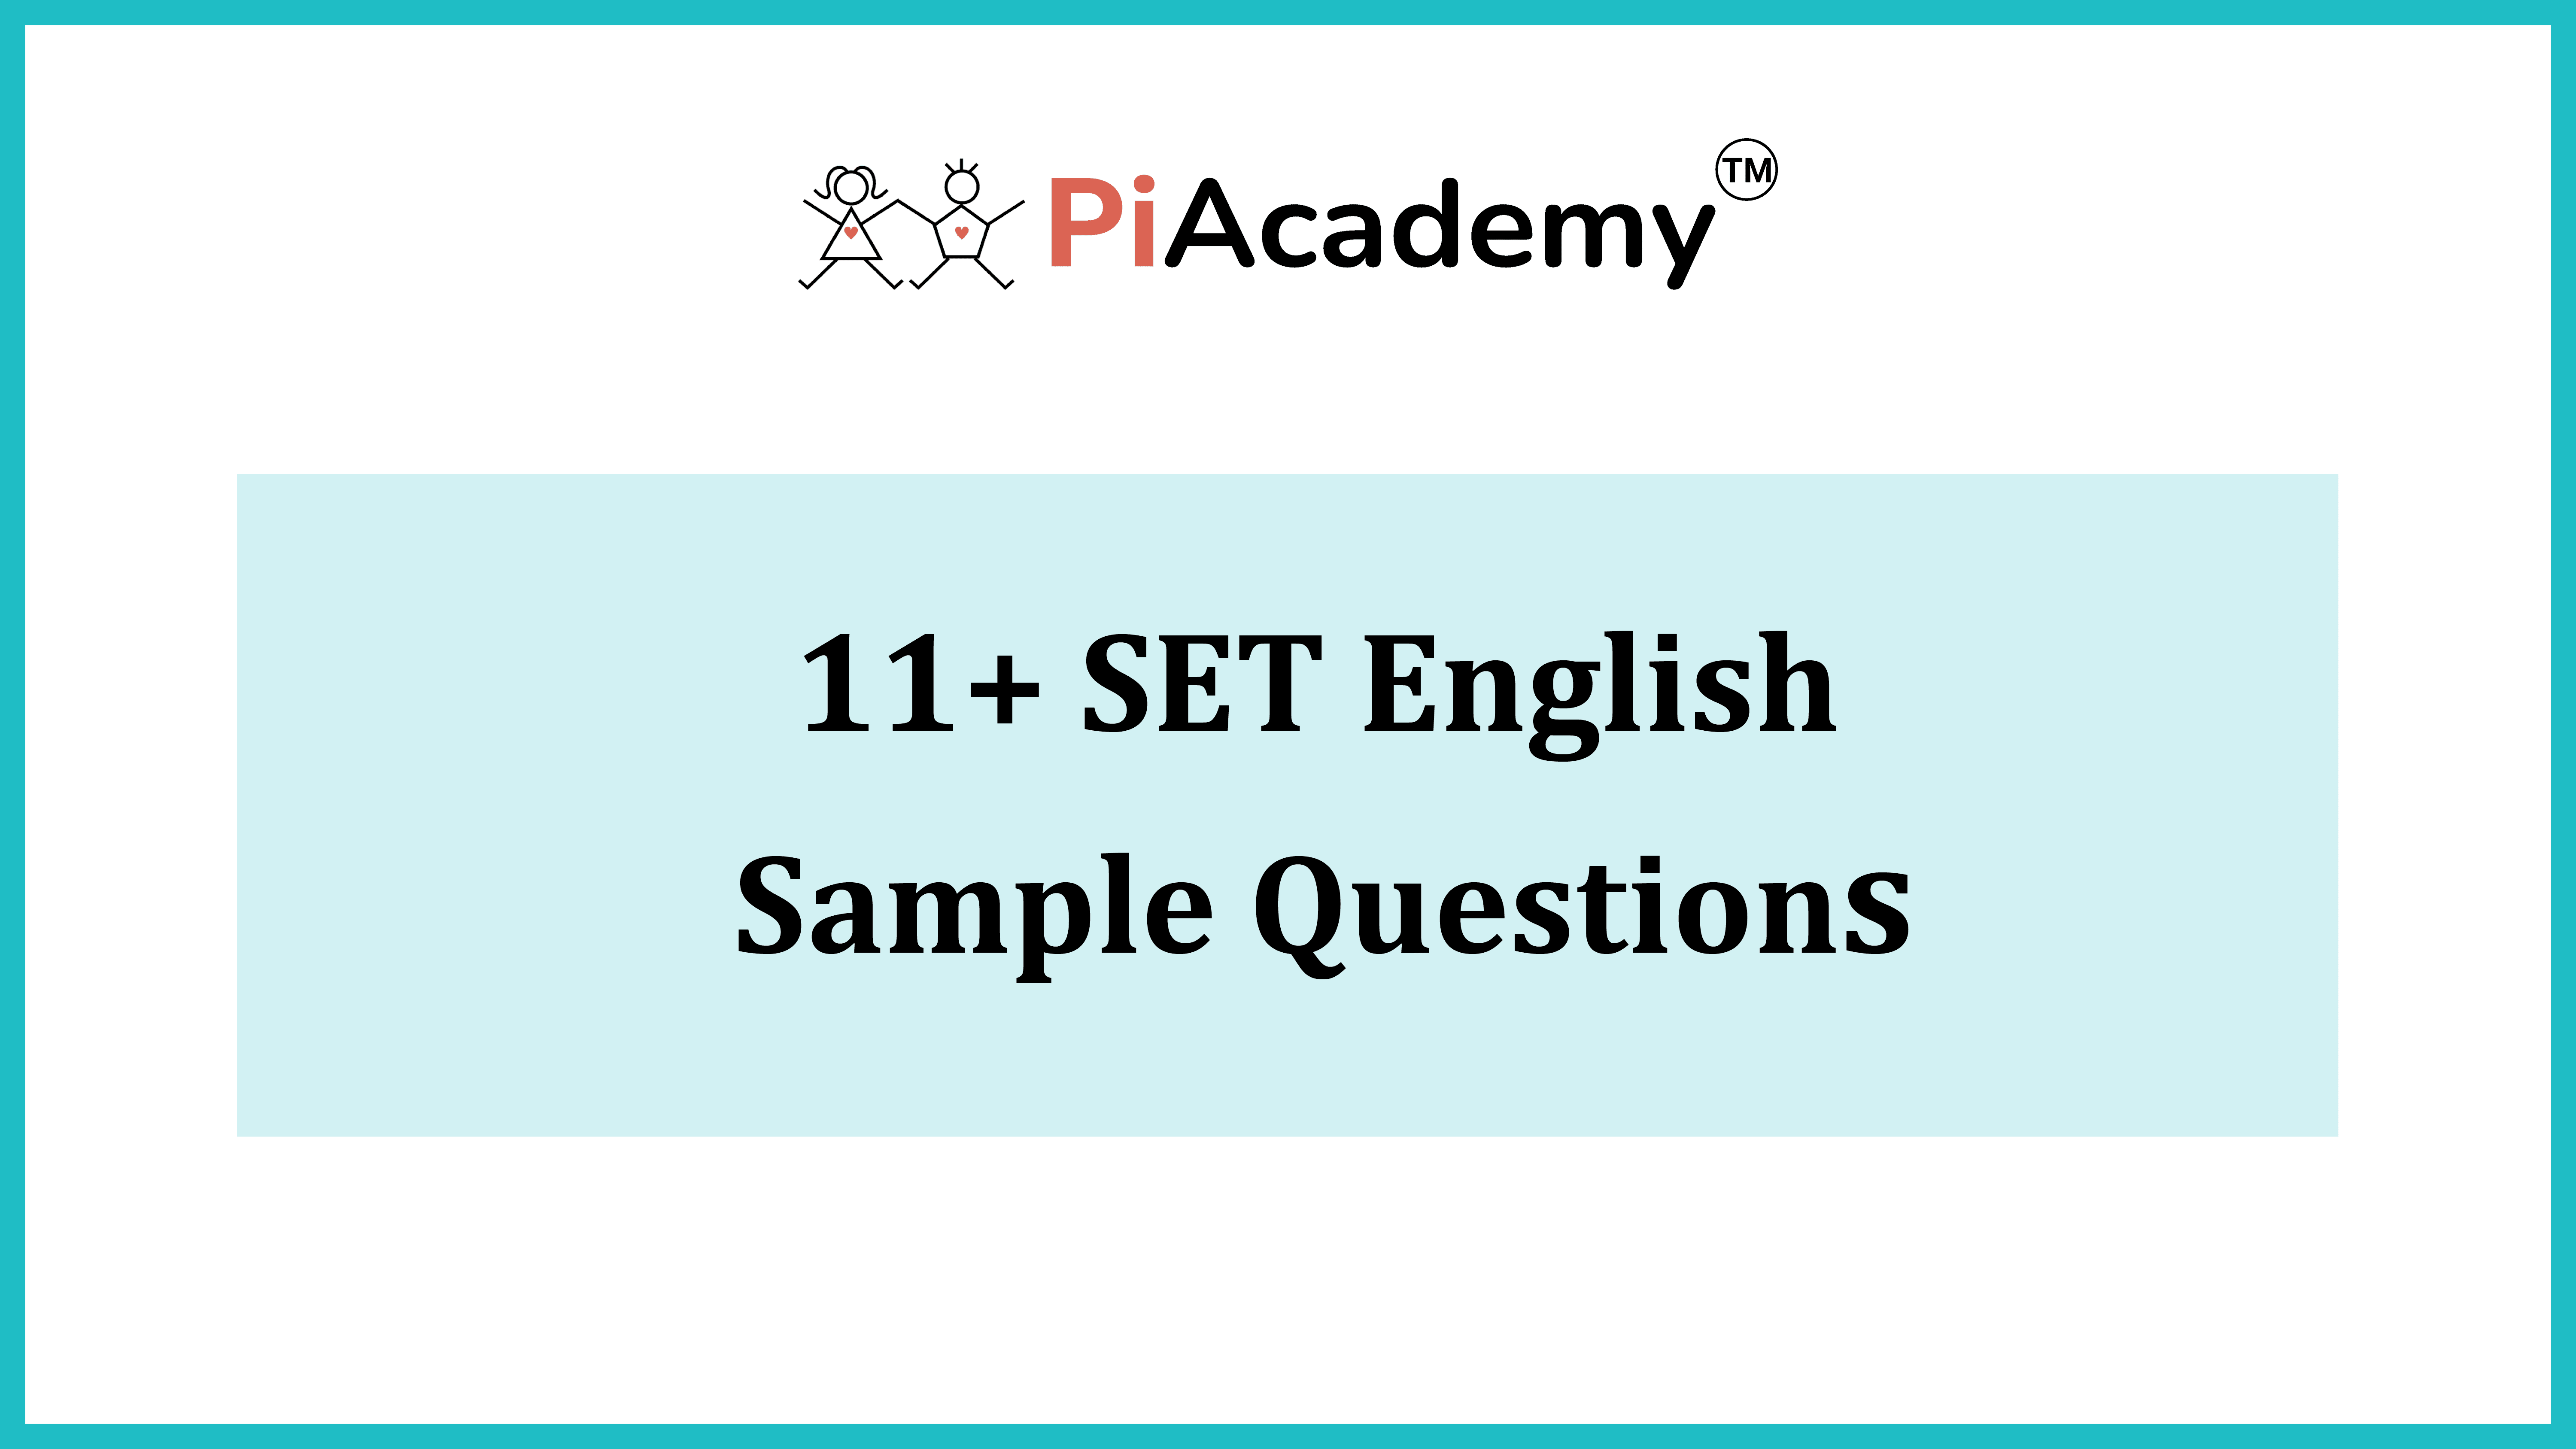 11-SET-Complete-Guide-Article-English-Title